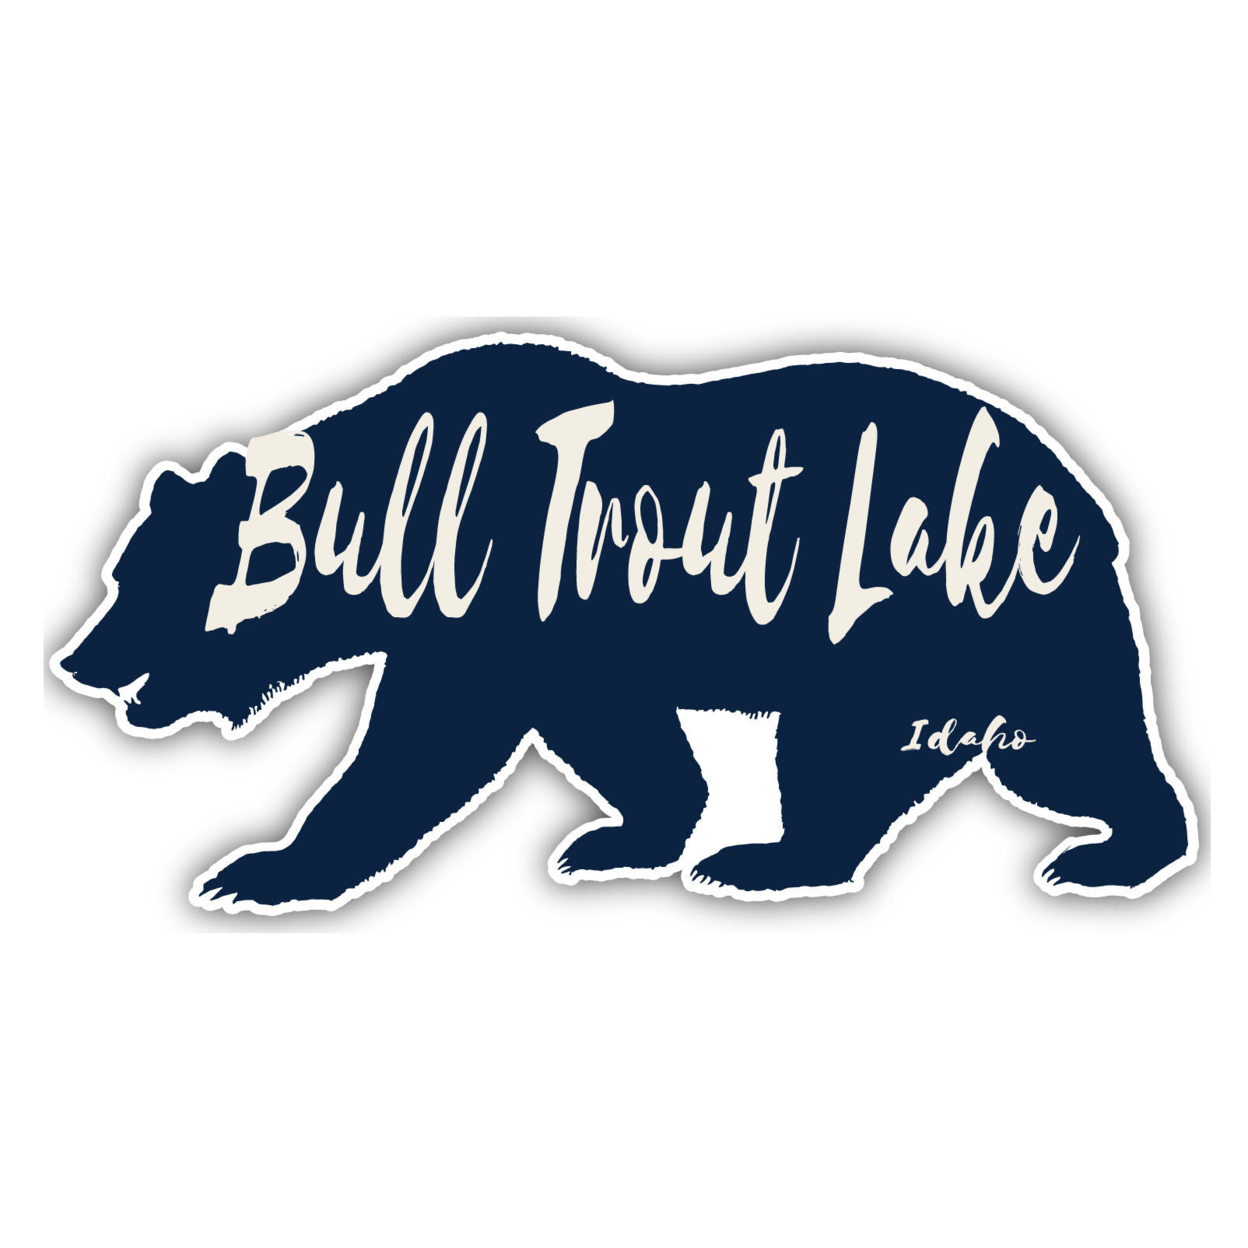 Bull Trout Lake Idaho Souvenir Decorative Stickers (Choose Theme And Size) - 4-Pack, 8-Inch, Bear